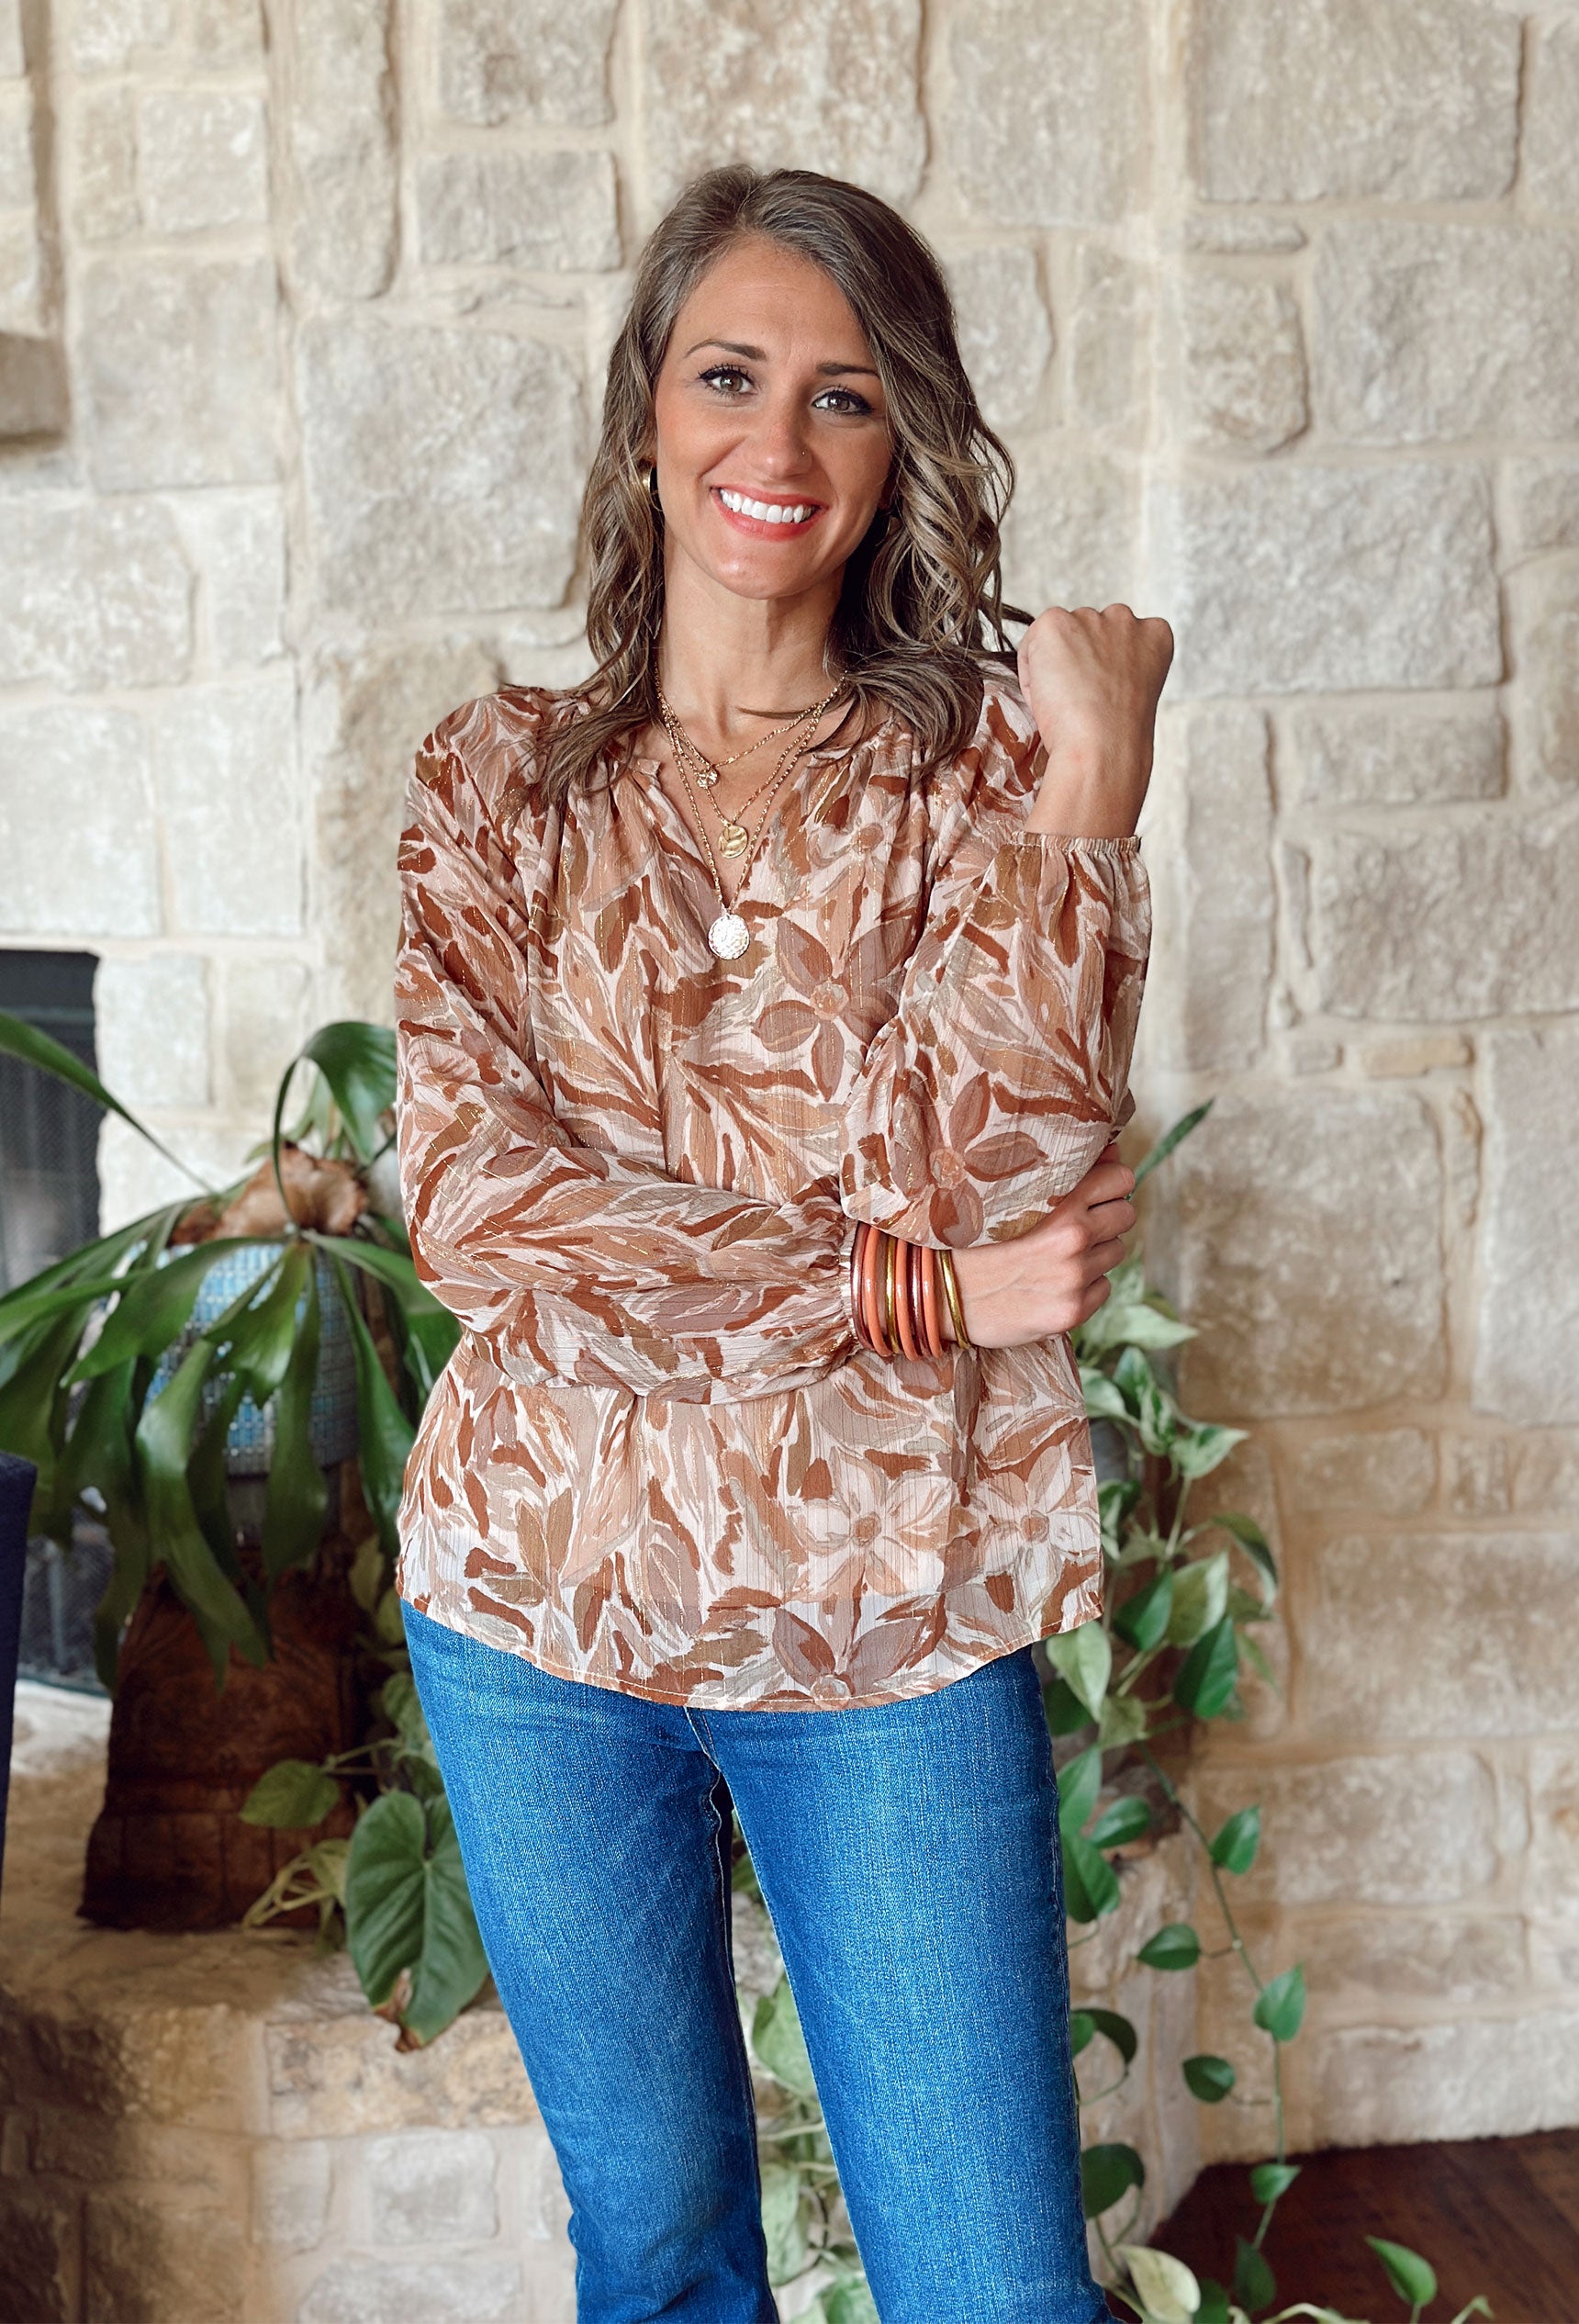 Fresh Take Floral Blouse, tan blouse with abstract tan, cream, and taupe floral print